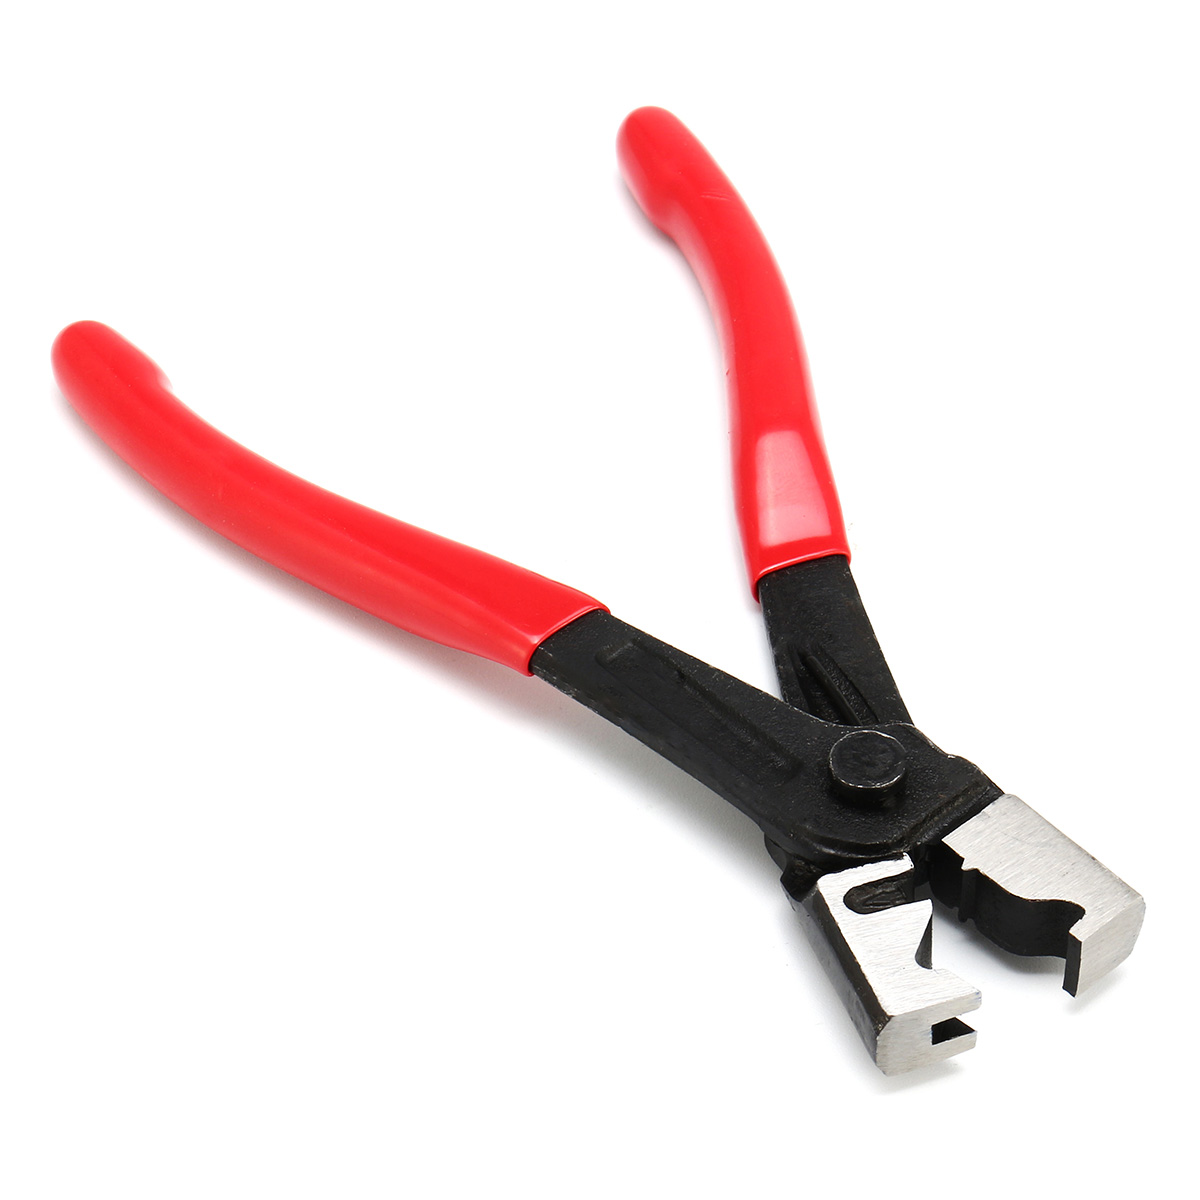 Pliers R Type Collar Hose Clip Clamp Pliers Water Pipe Fuel Hose Installer Remover Removal Clamp Calliper Car Repair Hand Tools